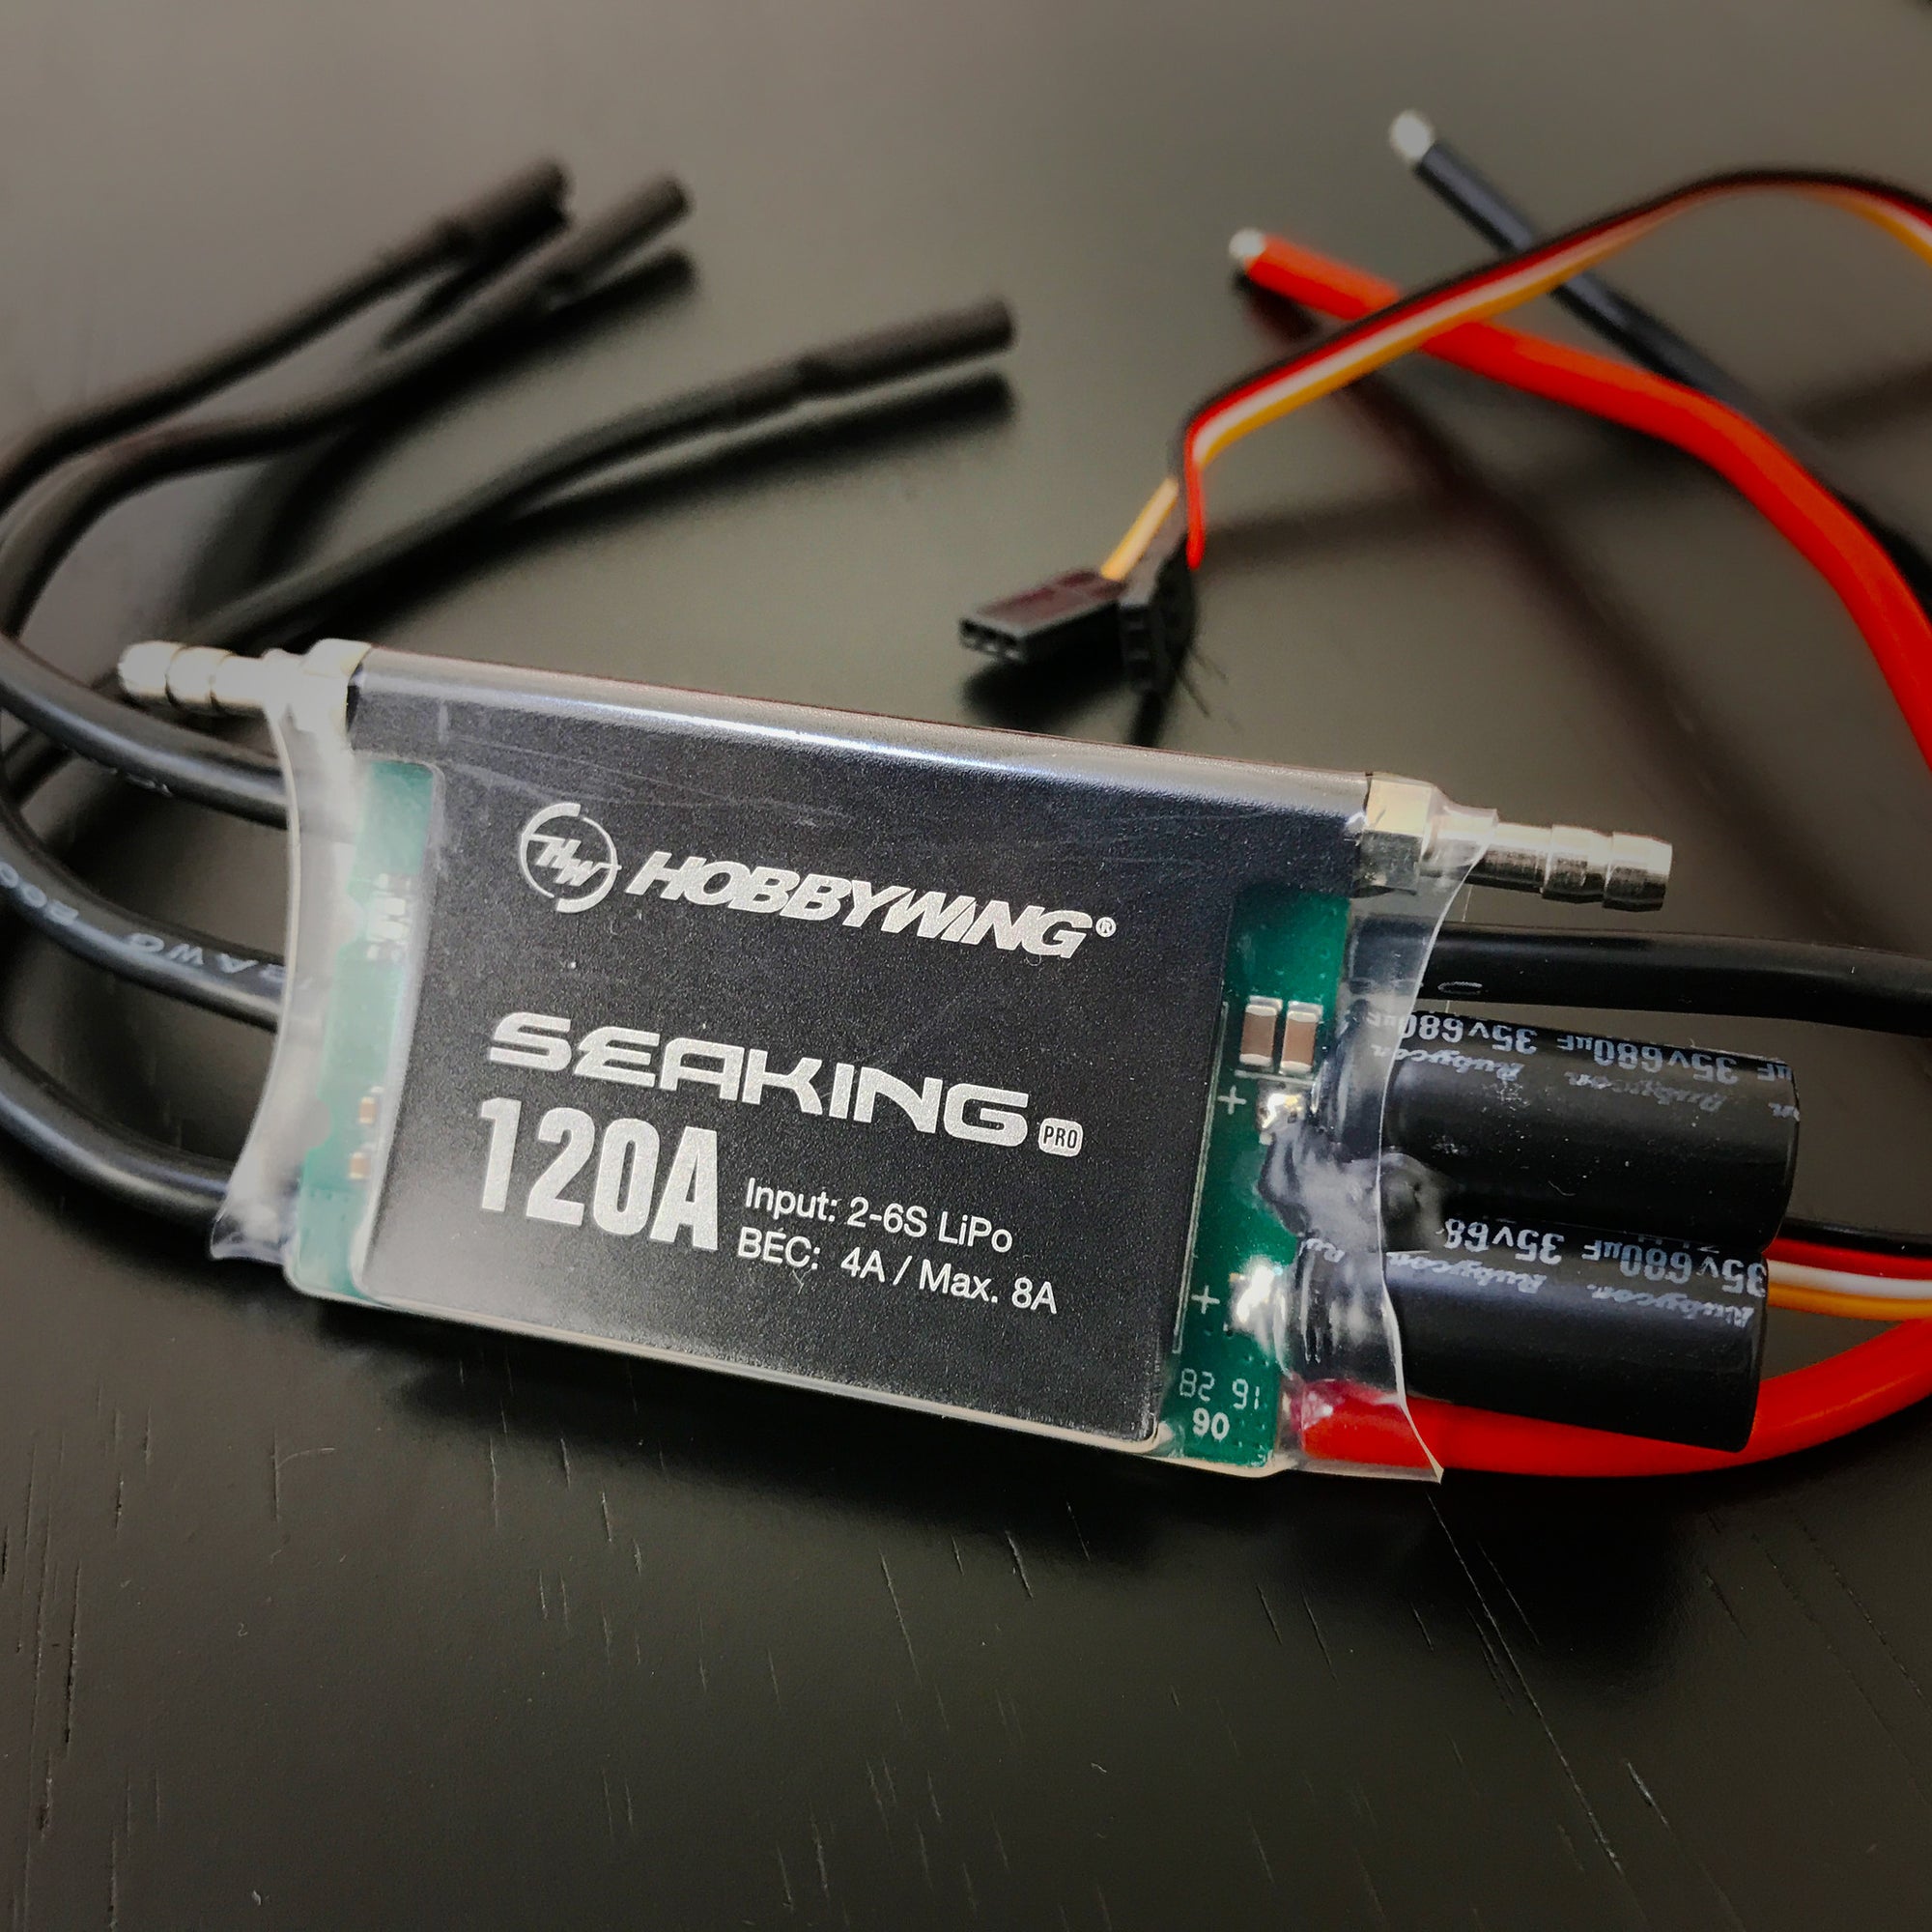 News: SEAKING Pro 120A ESC available in North America